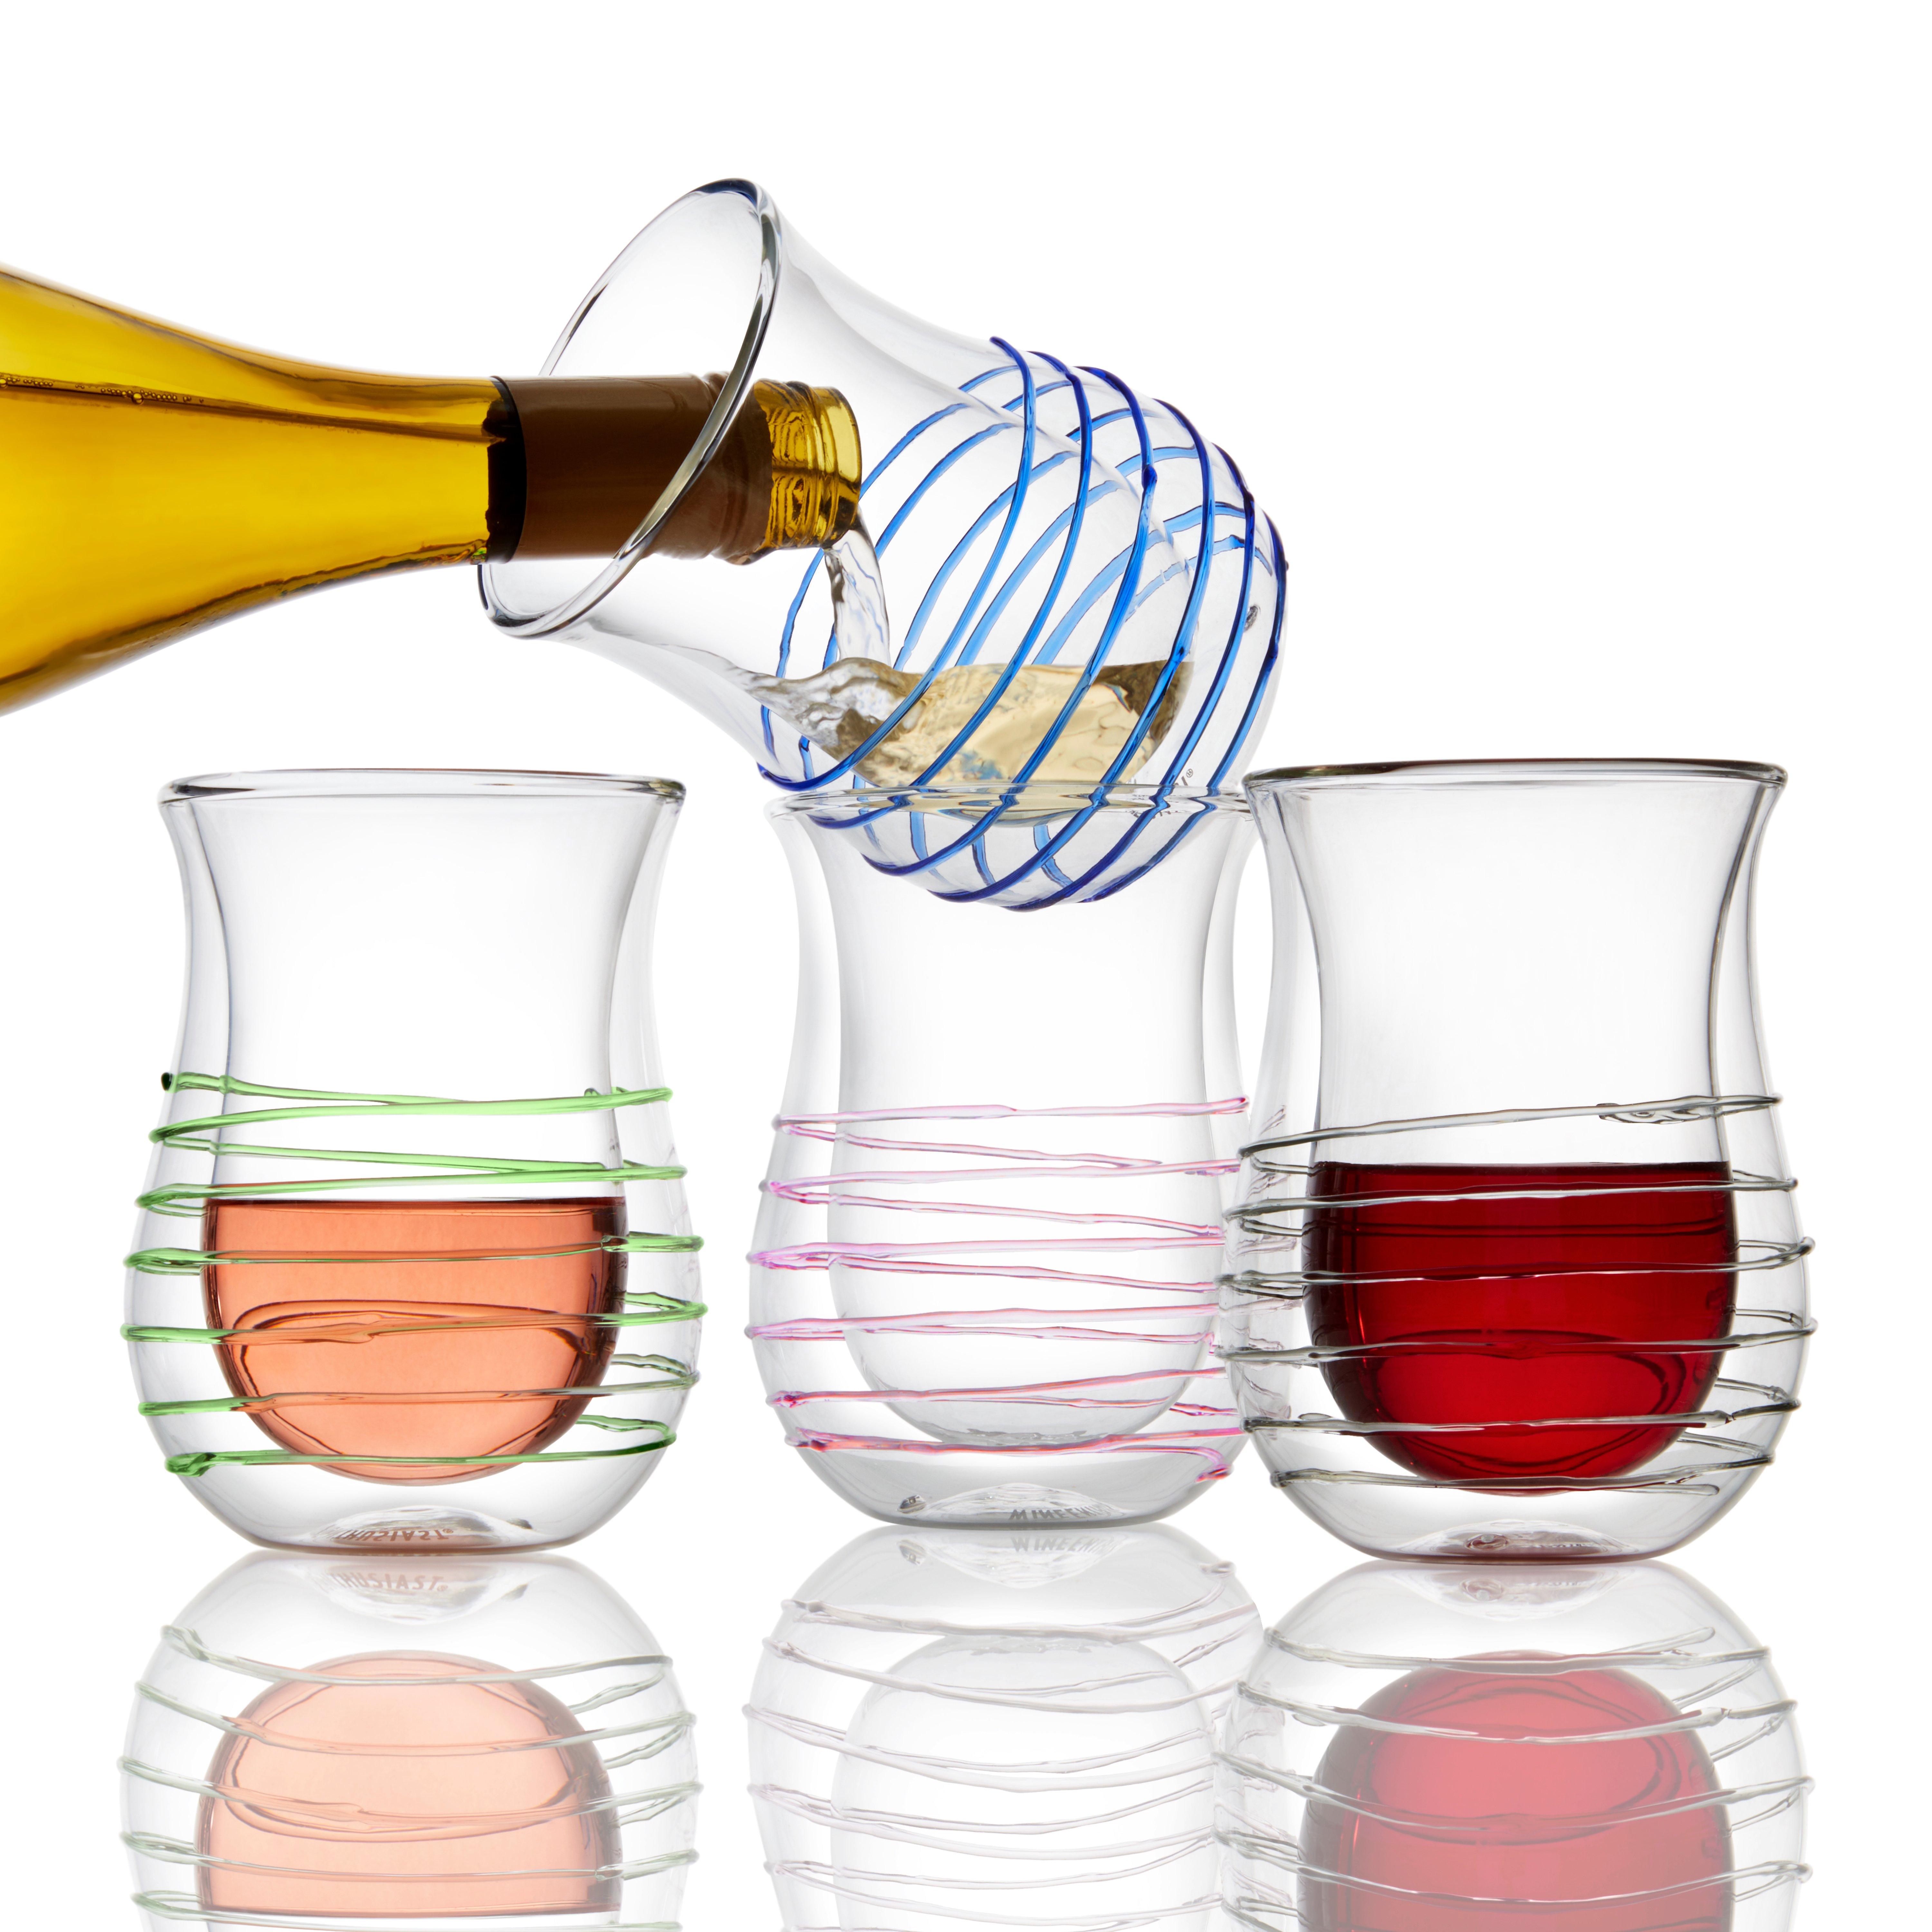 Double Wall Wine Glass Insulated Double Wall Wine Glasses for